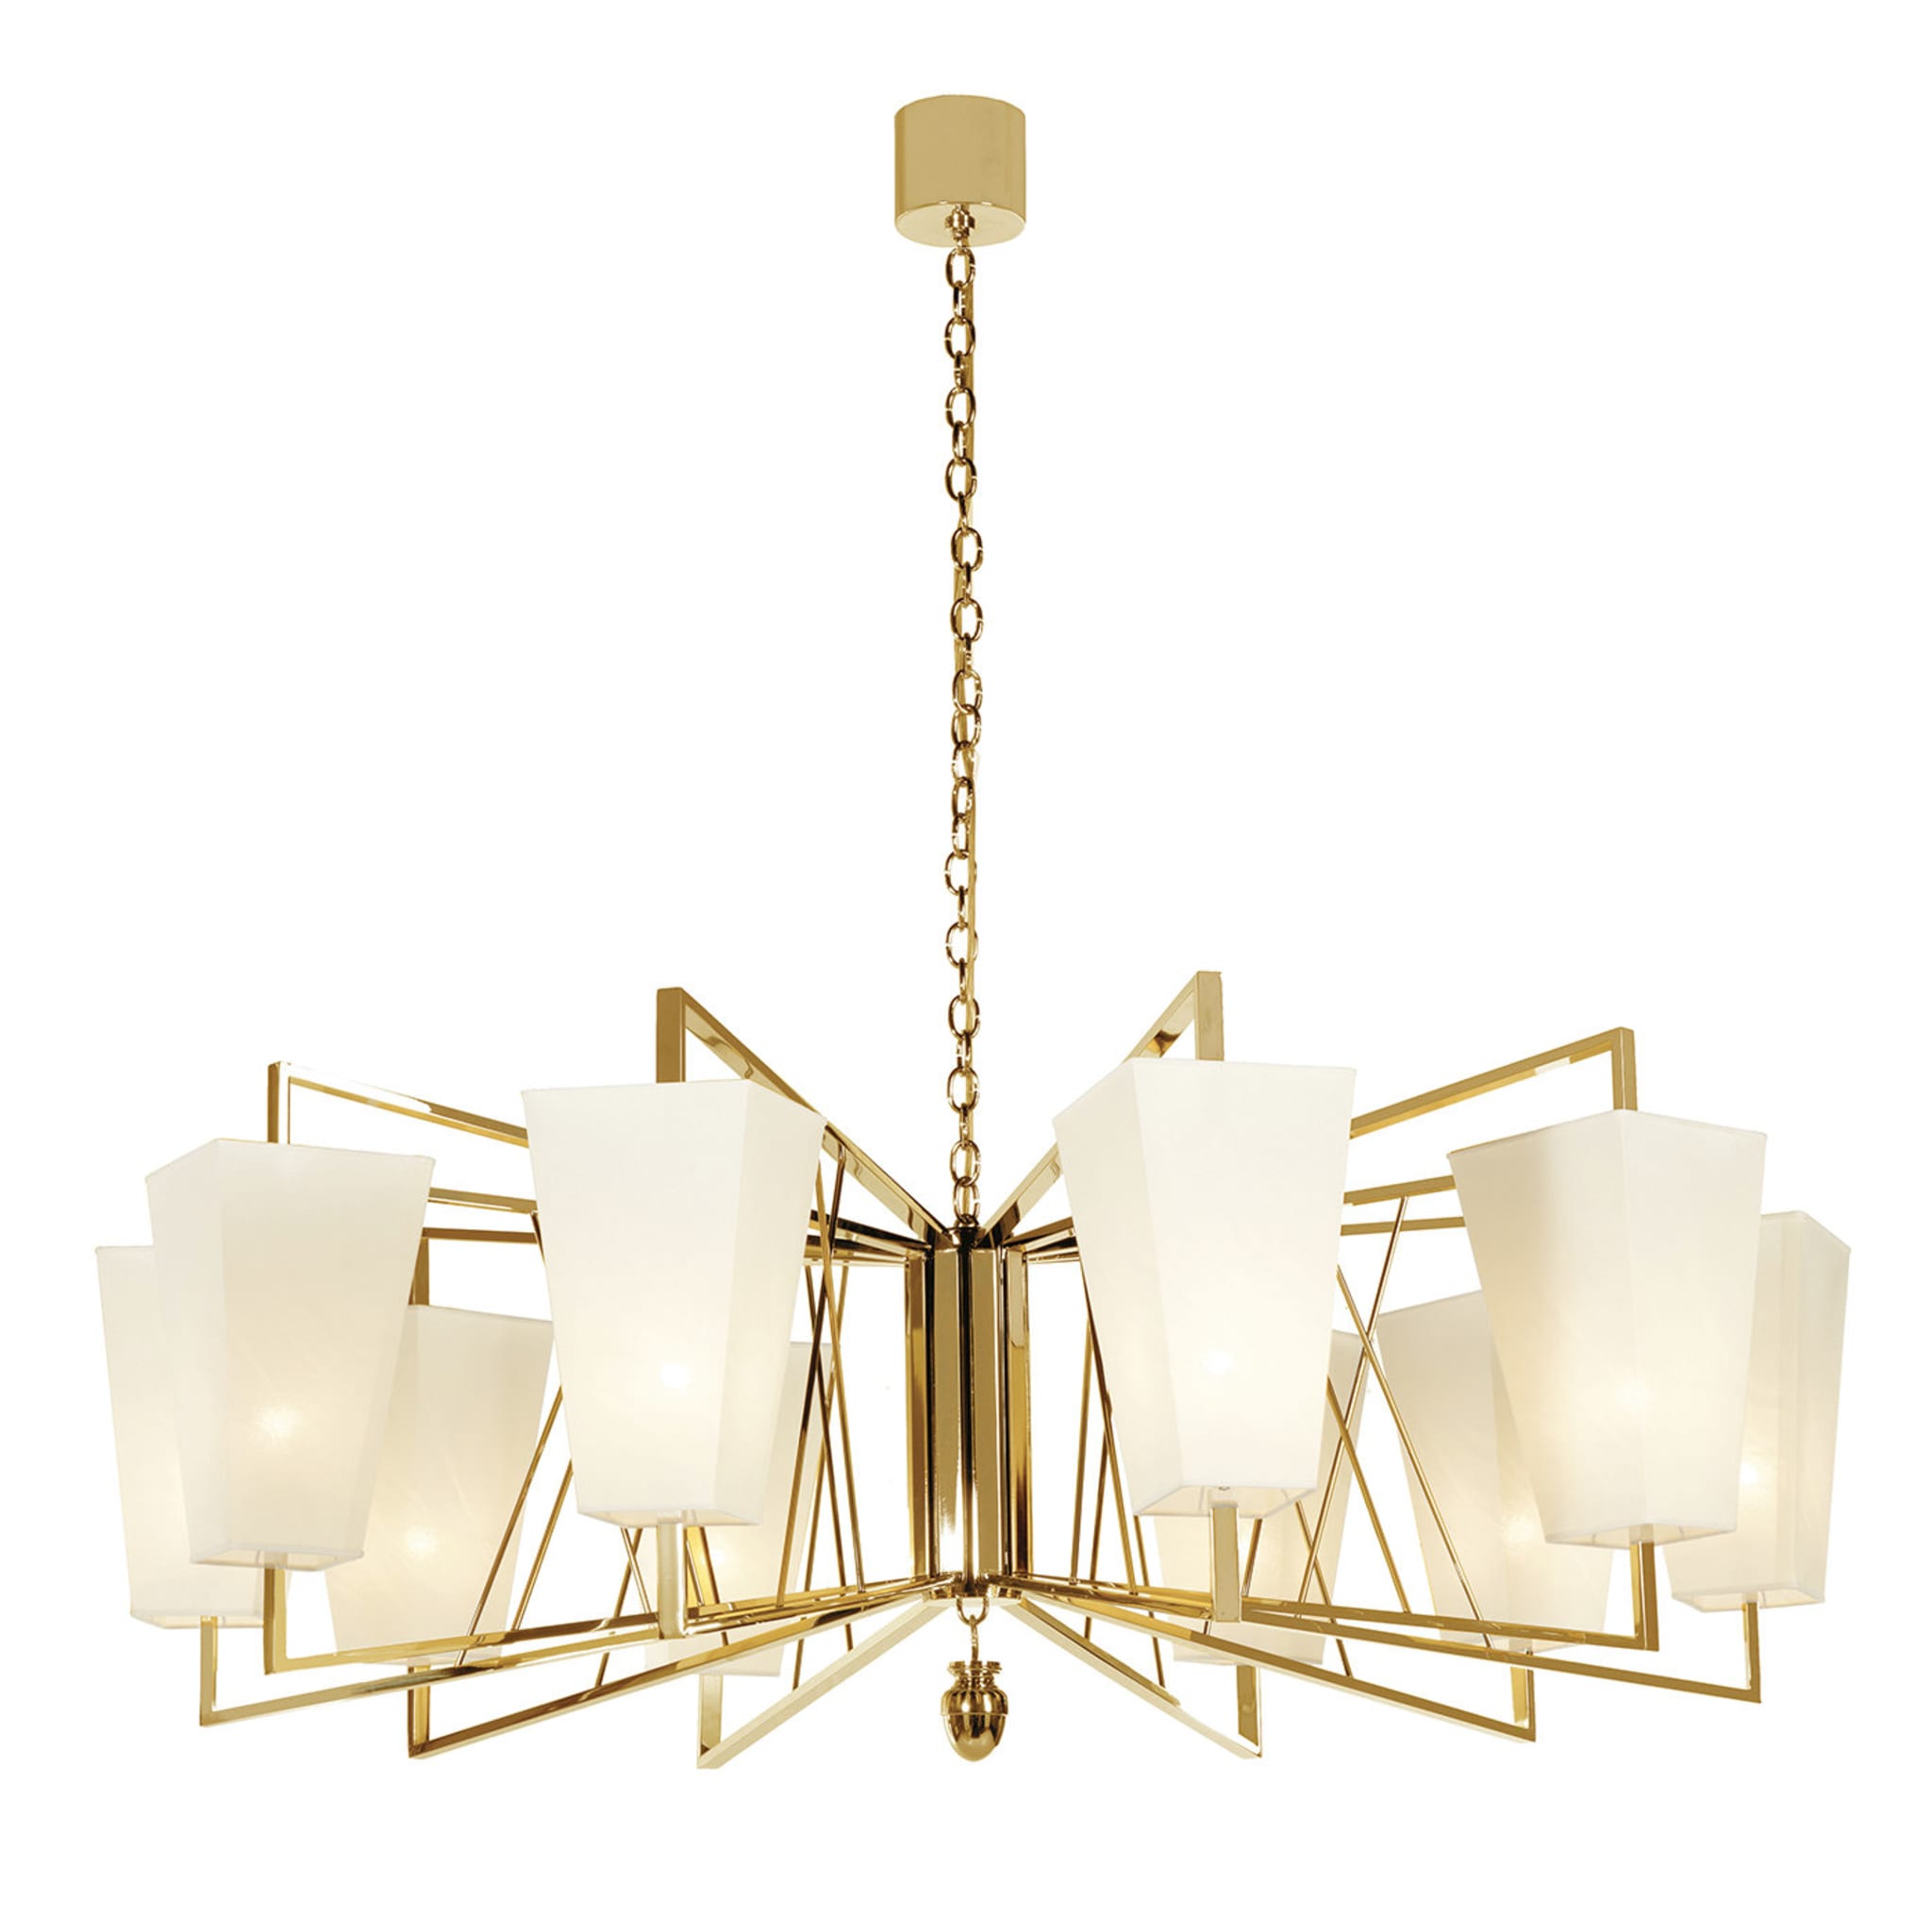 Orione/G Chandelier - Main view